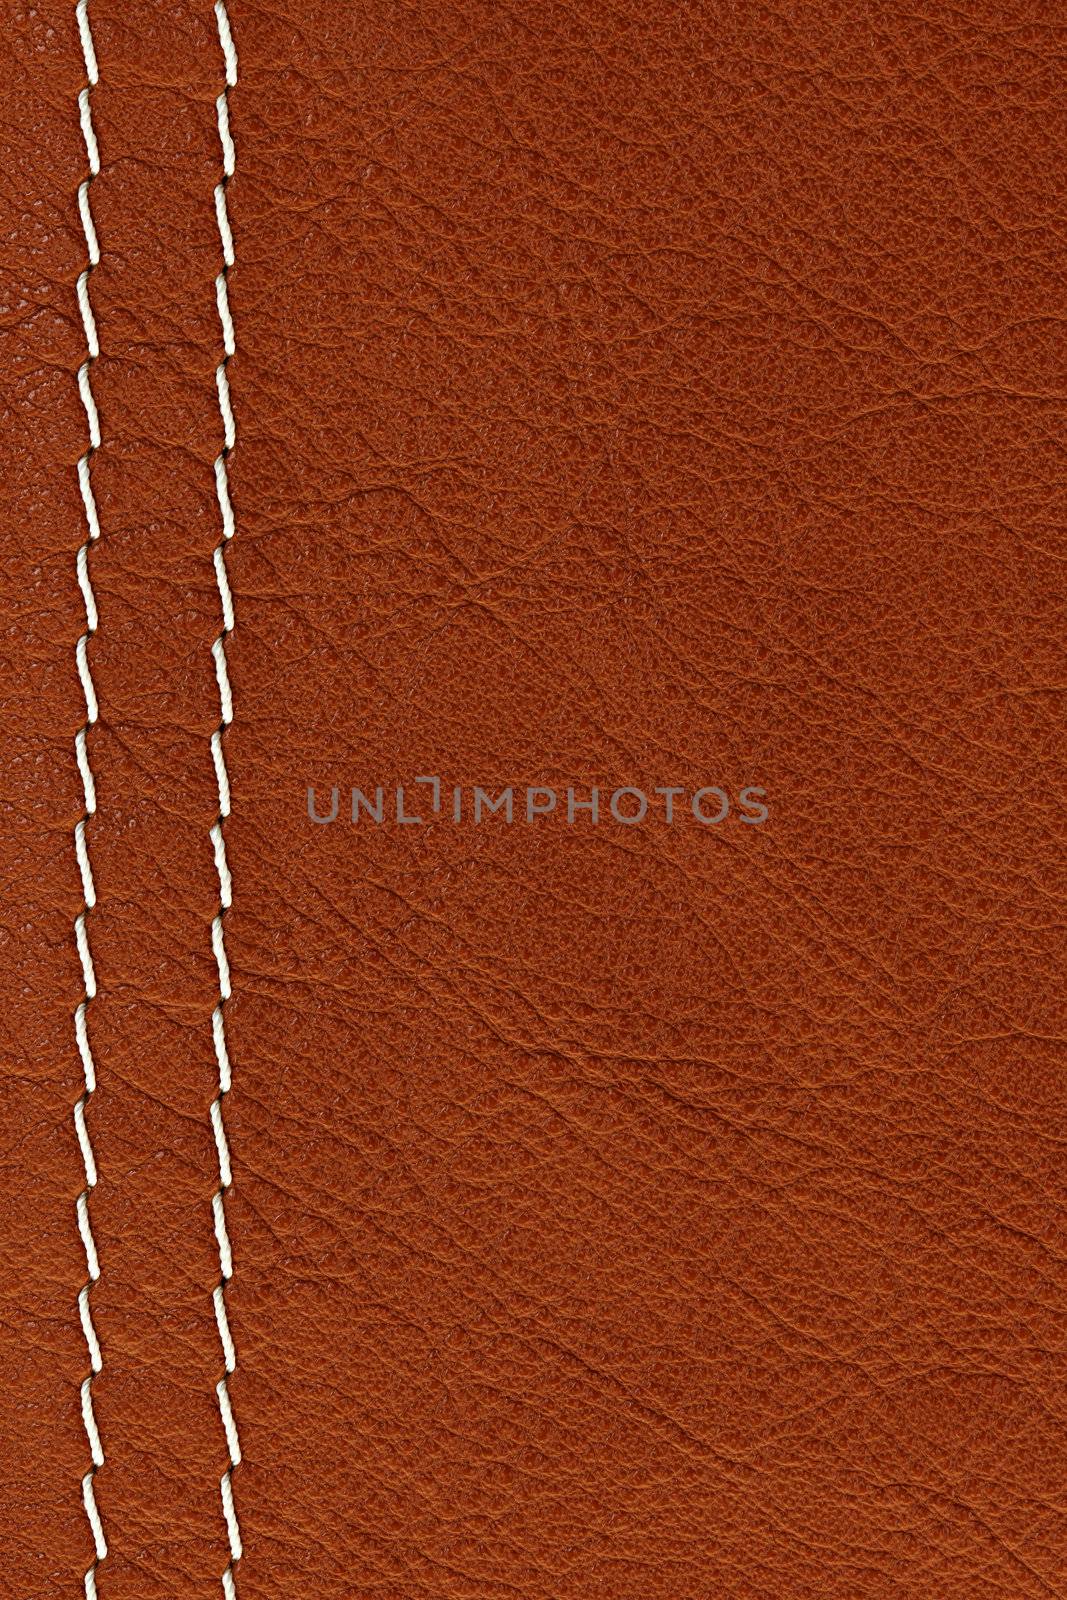 Leather background in brown with white stitches